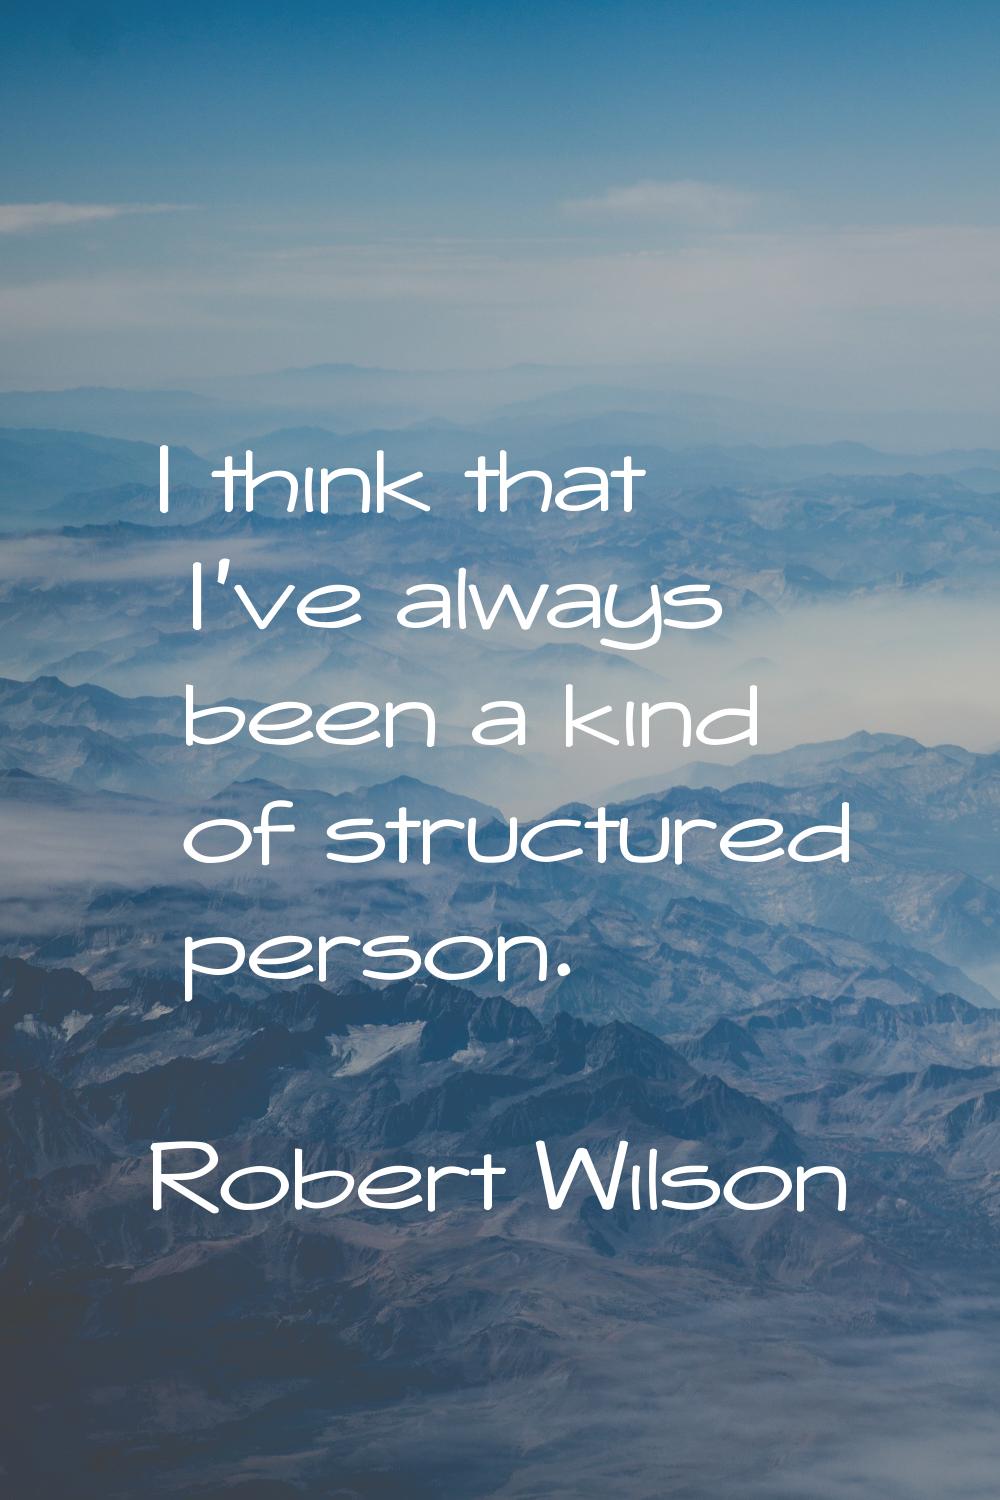 I think that I've always been a kind of structured person.